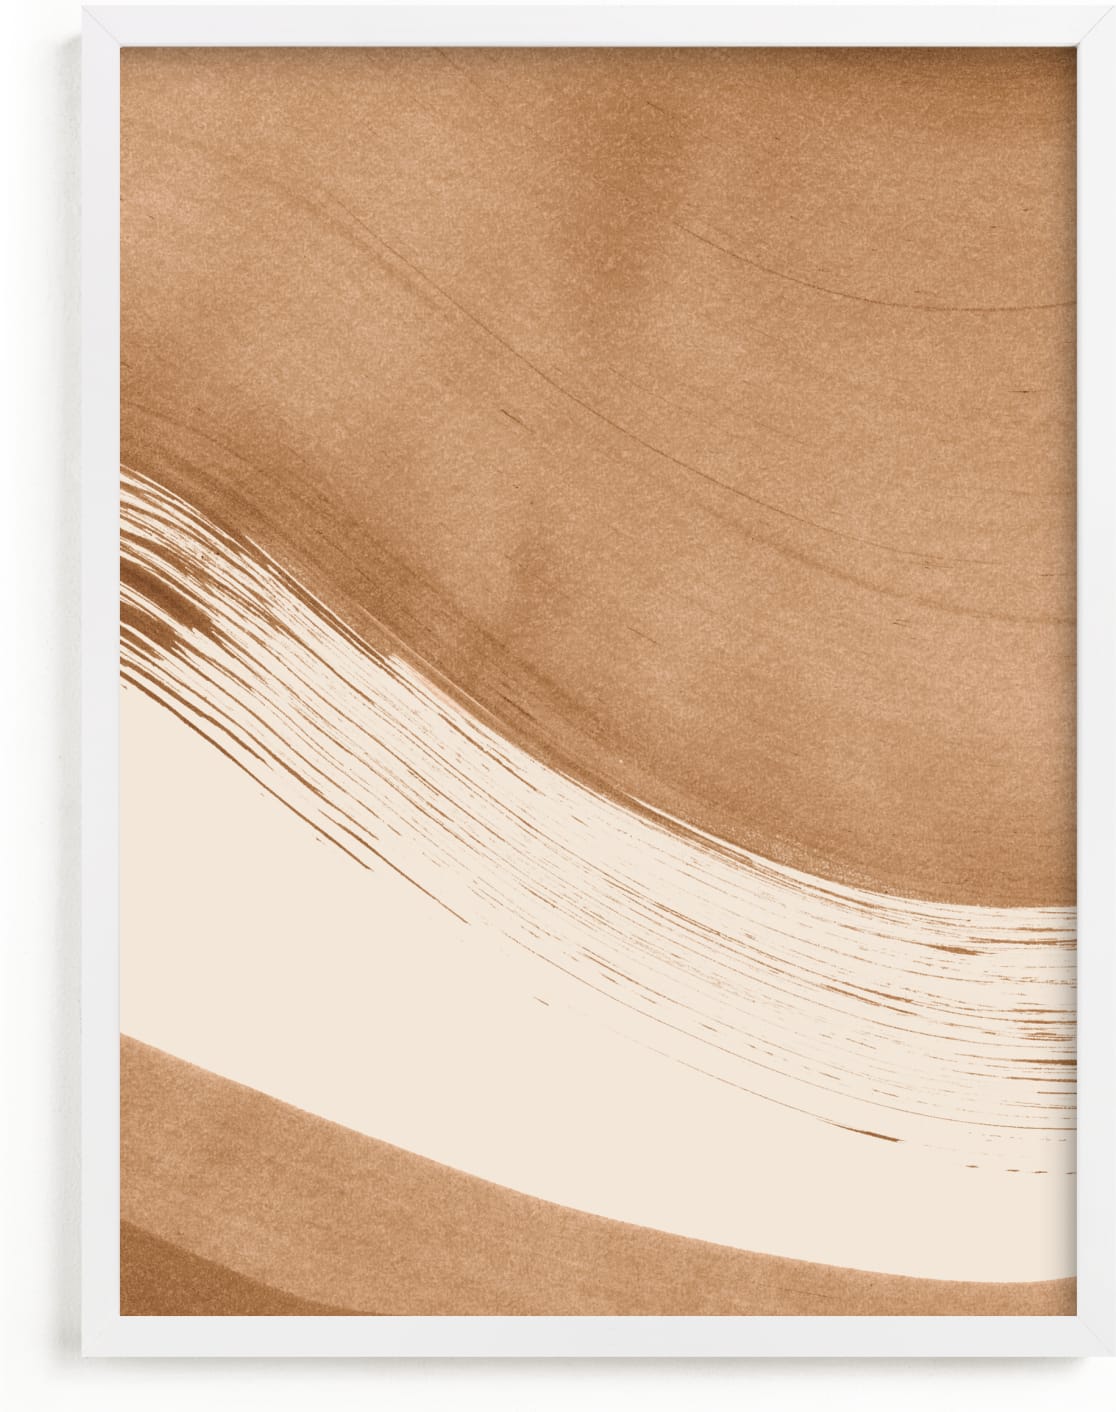 This is a brown art by Melissa Selmin called Boundary No. 1.